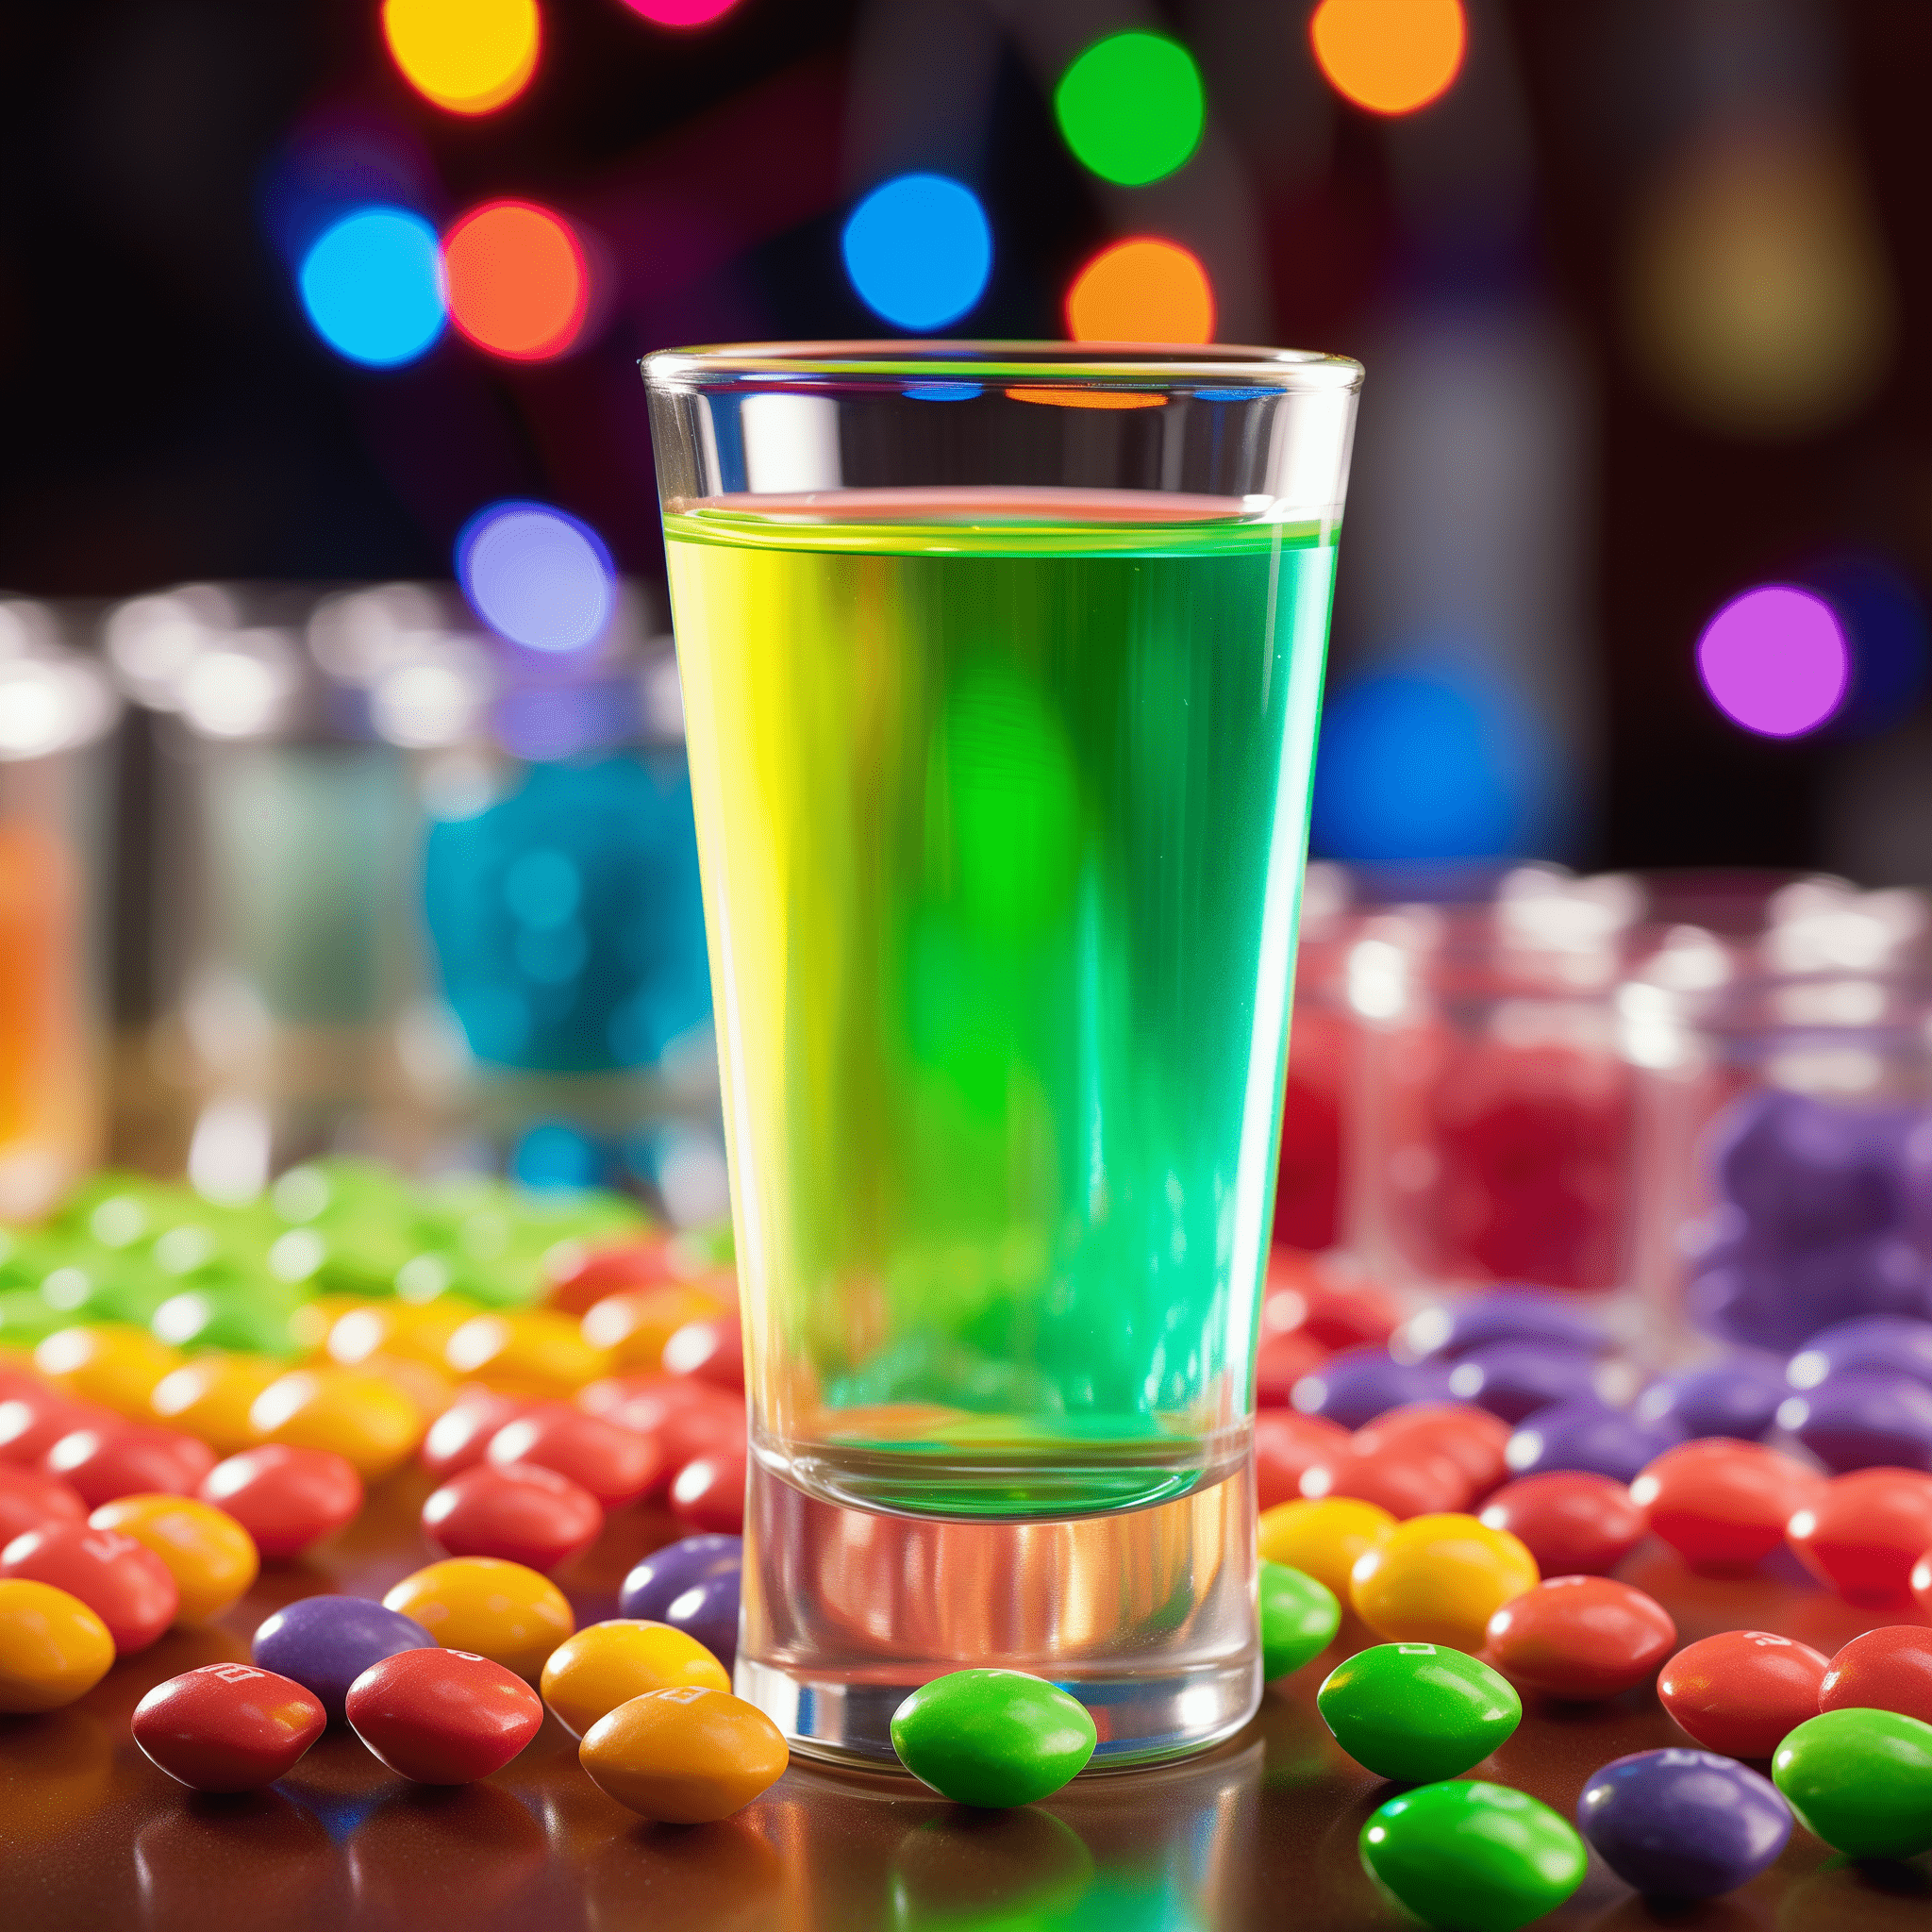 The Skittles Shot is a delightful mix of sweet and tangy flavors, reminiscent of the candy it's named after. It's a vibrant, fruity concoction with a slight sour kick from the sweet and sour mix, balanced by the tropical notes of pineapple juice.